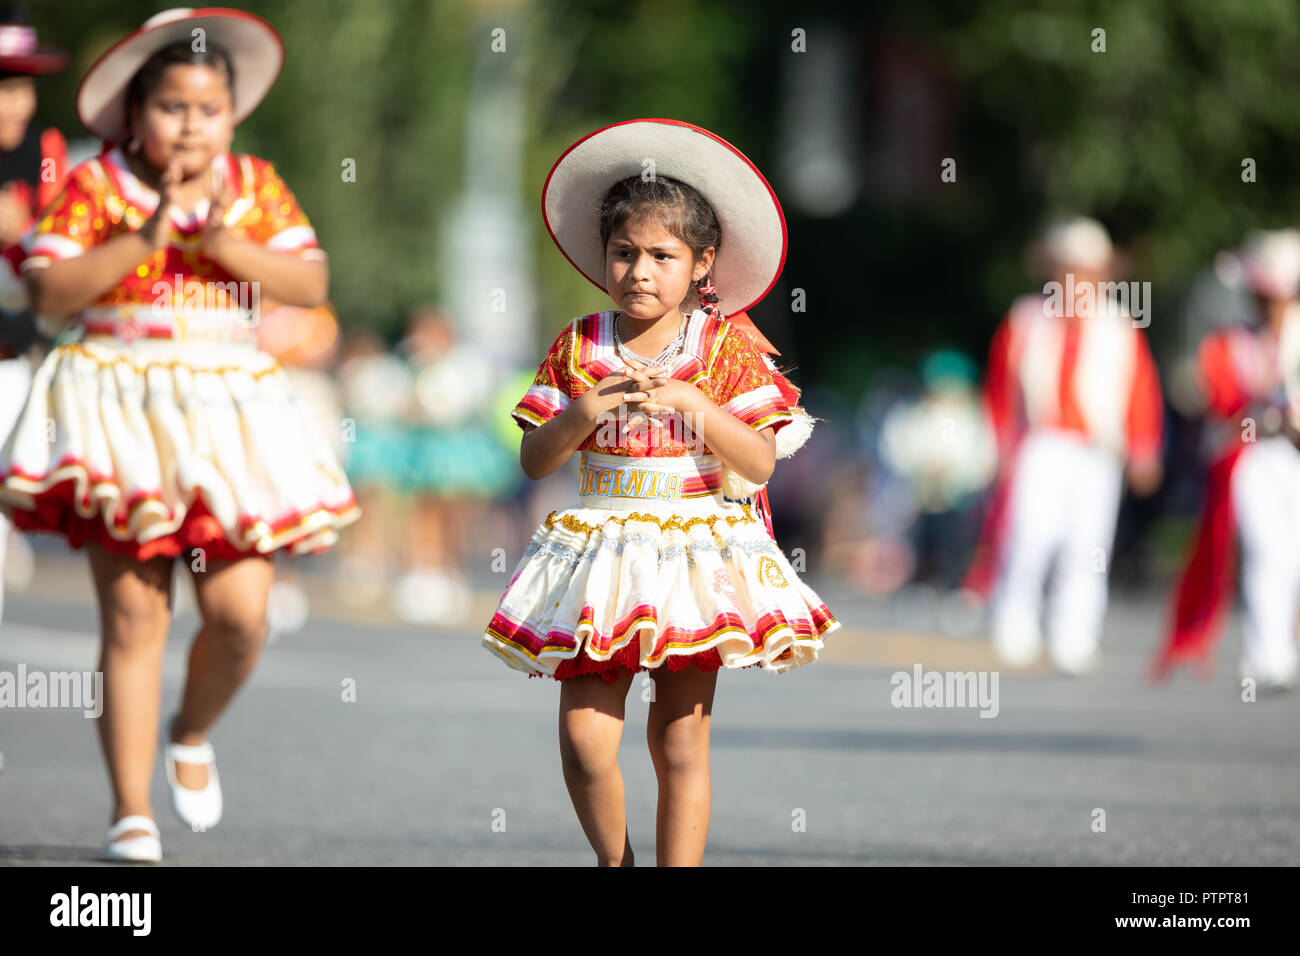 Washington, D.C., USA - September 29, 2018: The Fiesta DC Parade, Young Bolivian girl wearing traditional clothing going down the street during the pa Stock Photo